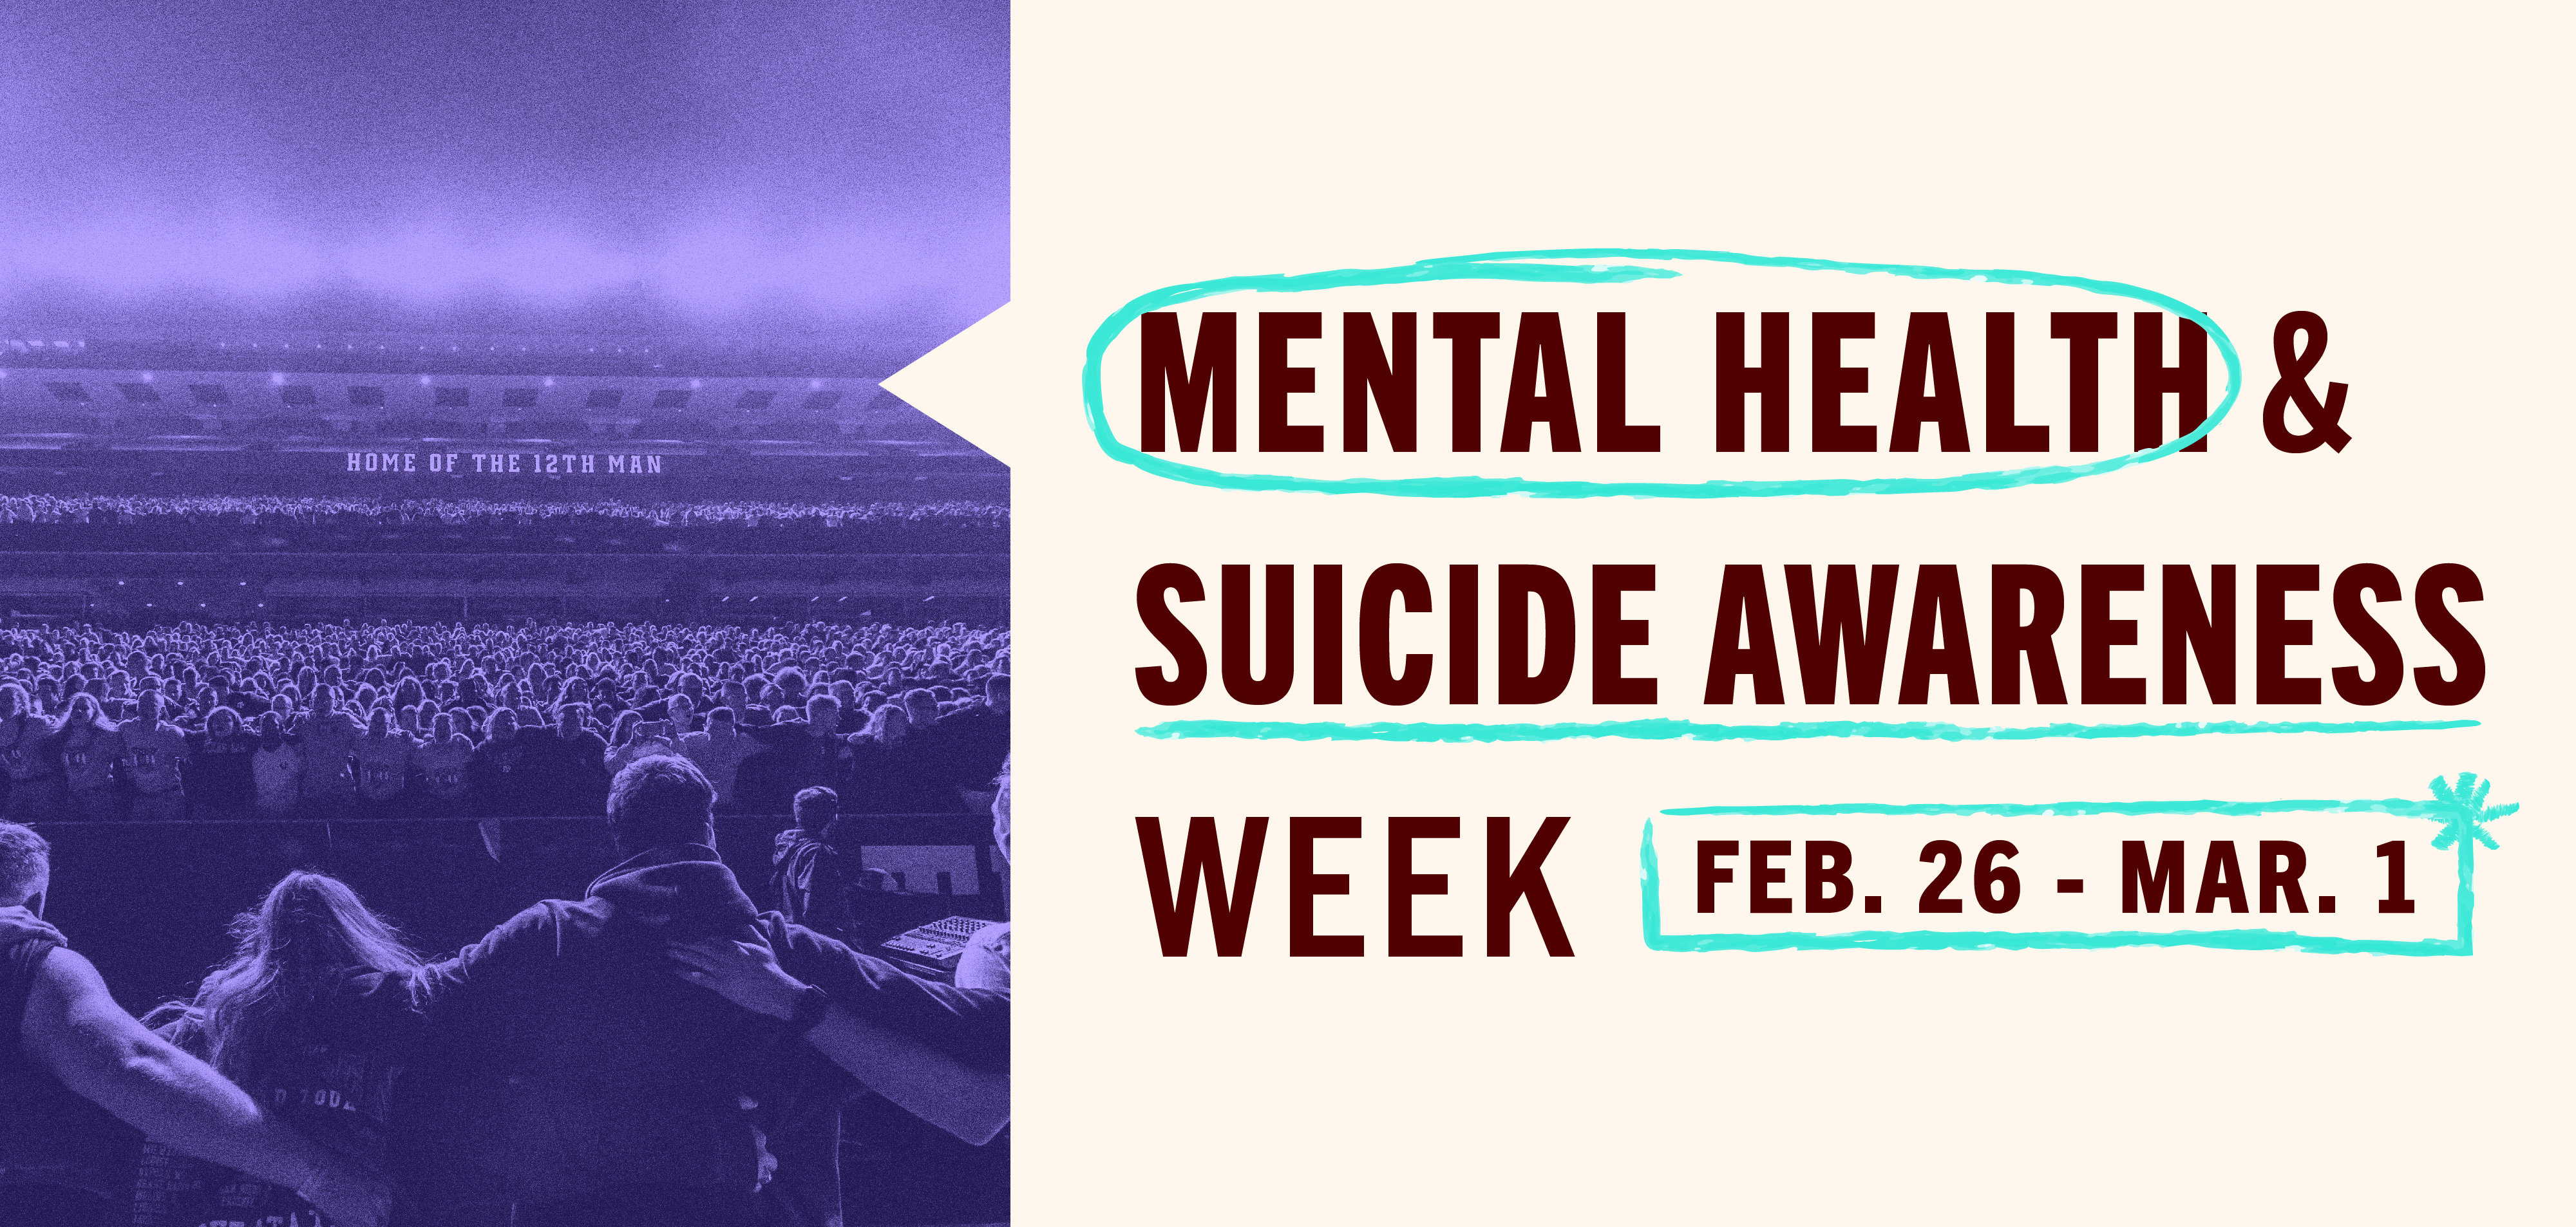 Mental Health & Suicide Awareness Week, February 26-March 1